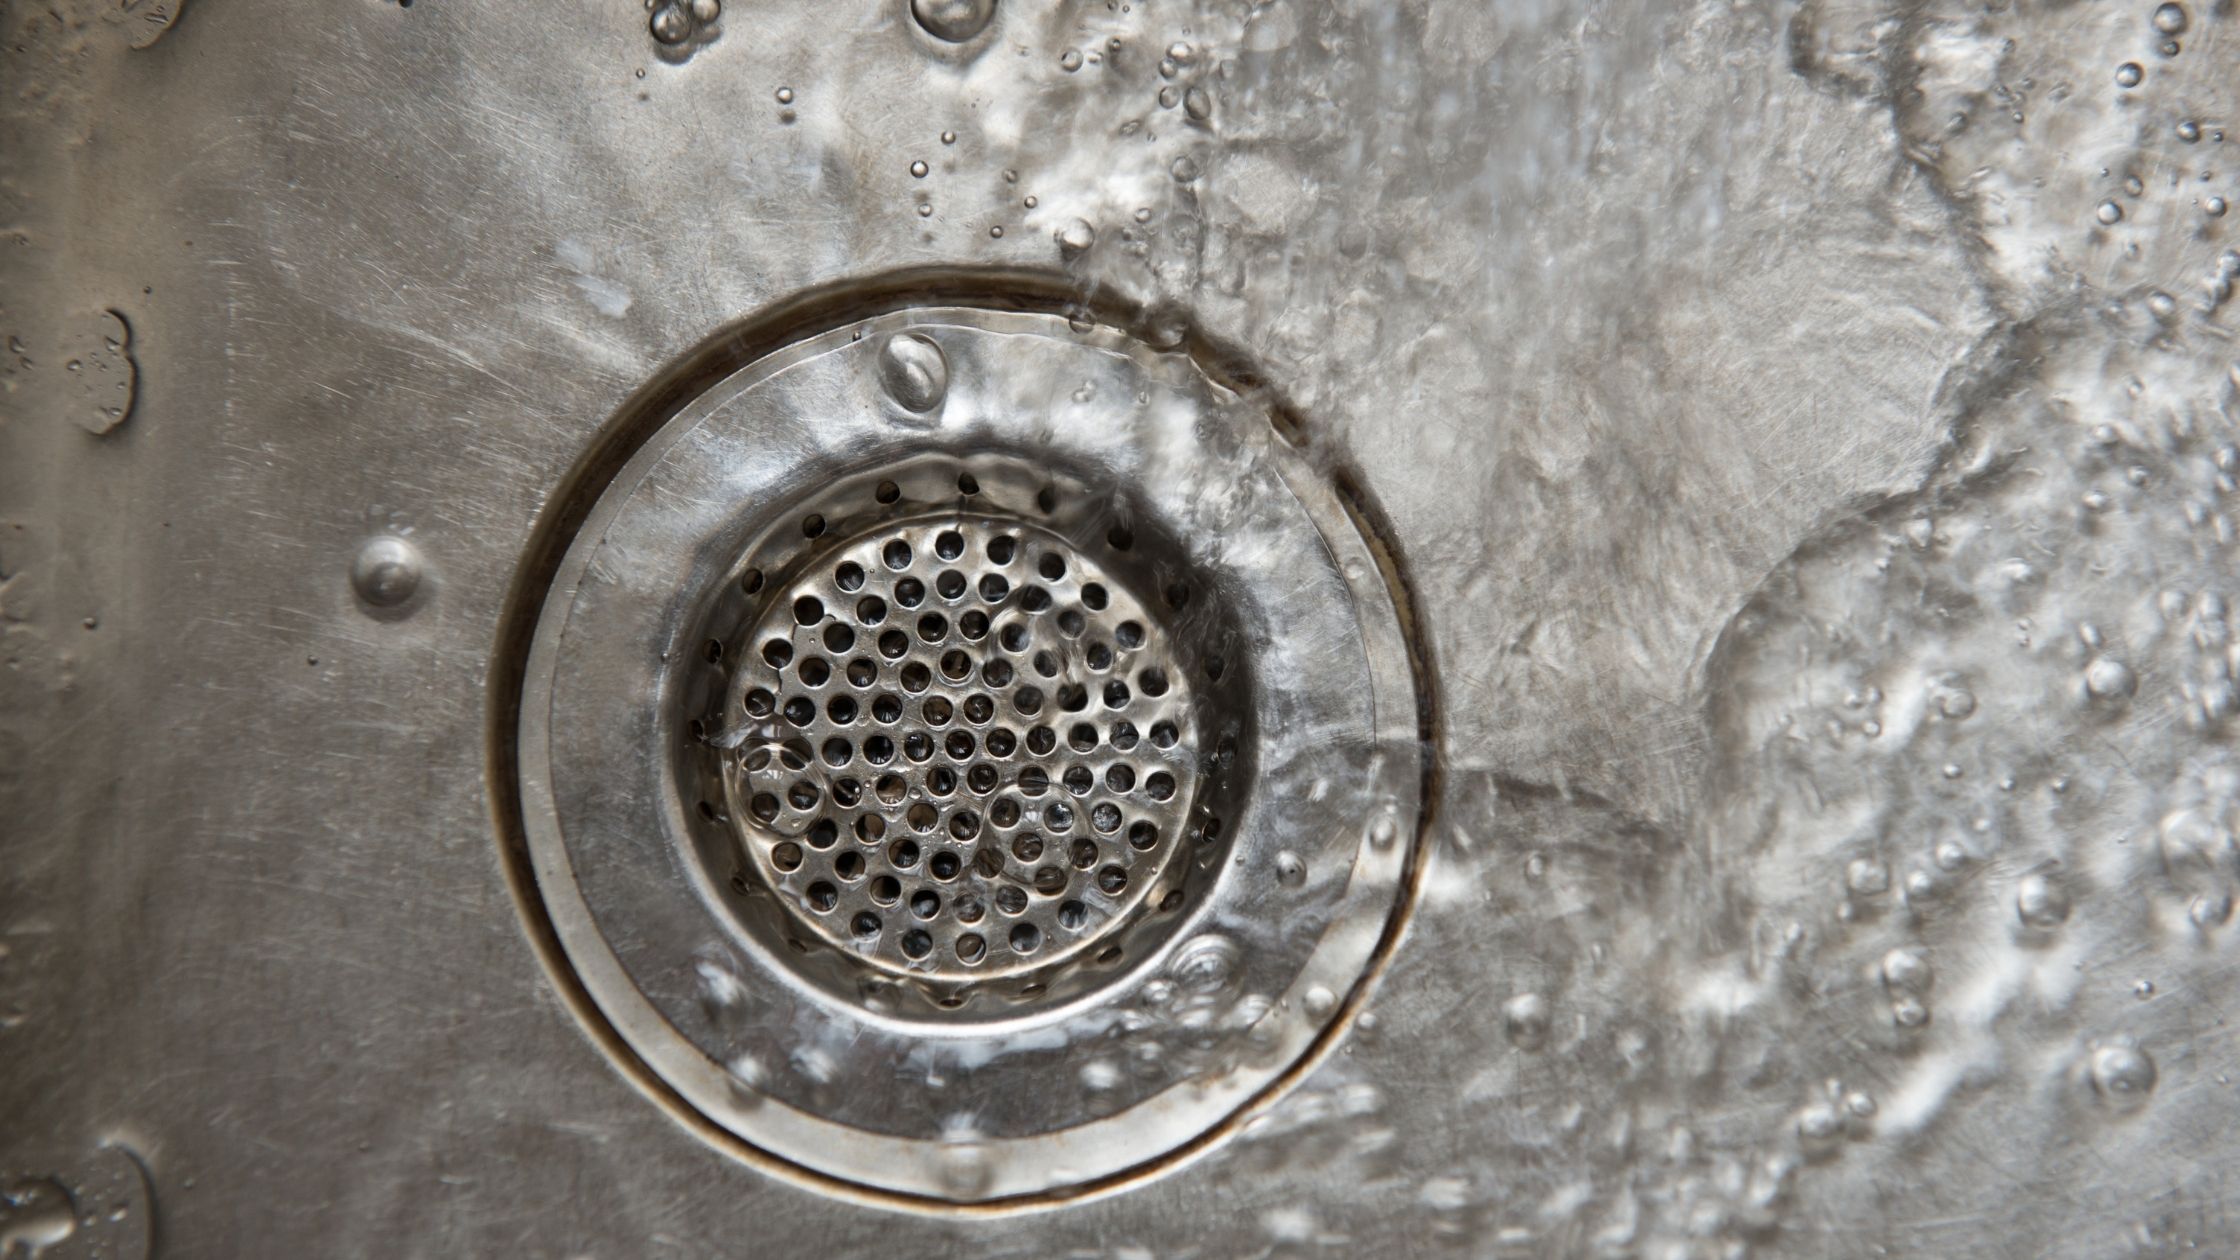 Water Coming up From Bathroom Sink Drain: Common Causes